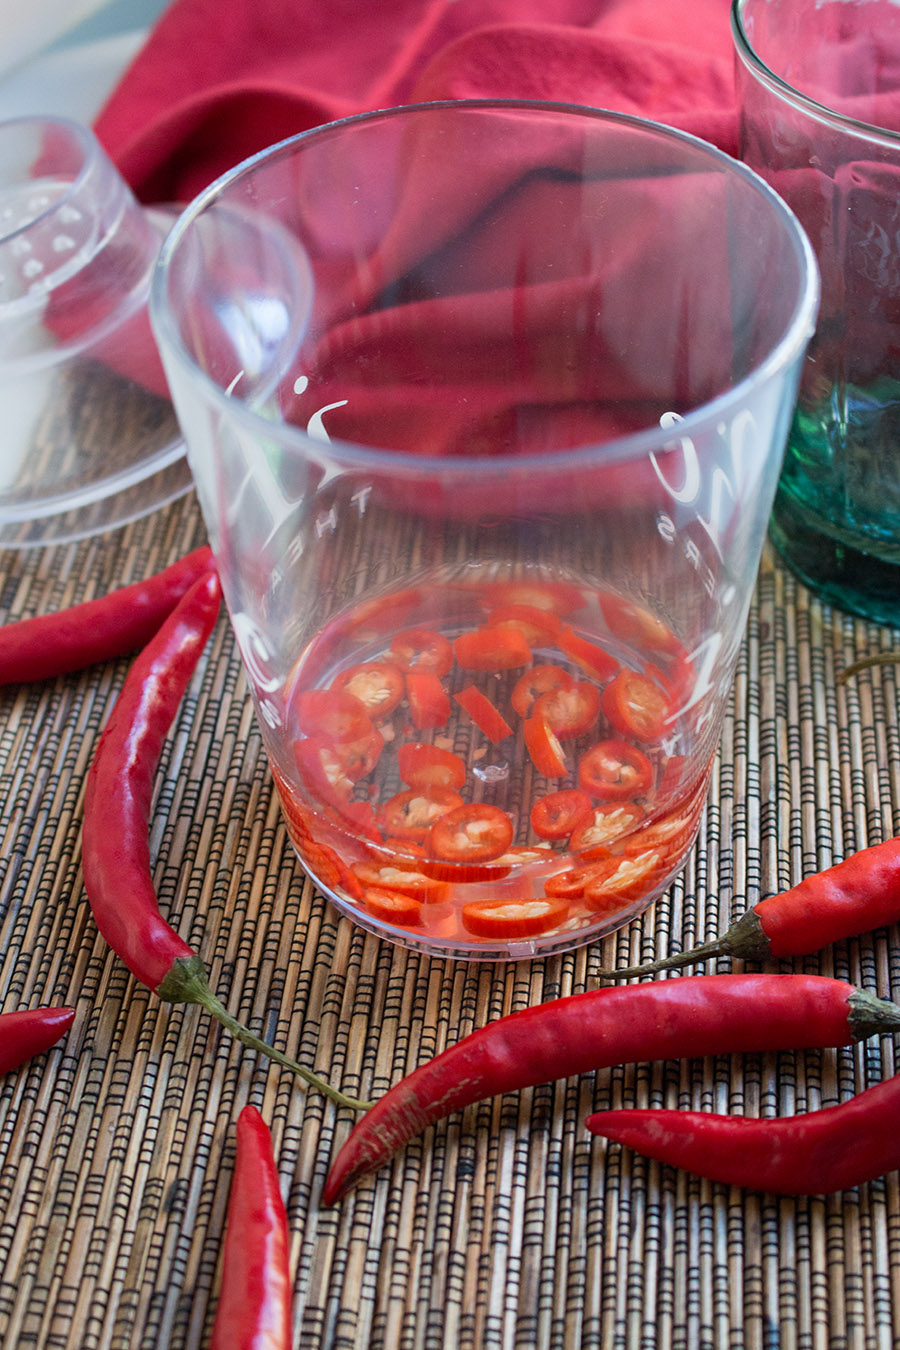 Infusing vodka with heat from the chilli peppers.